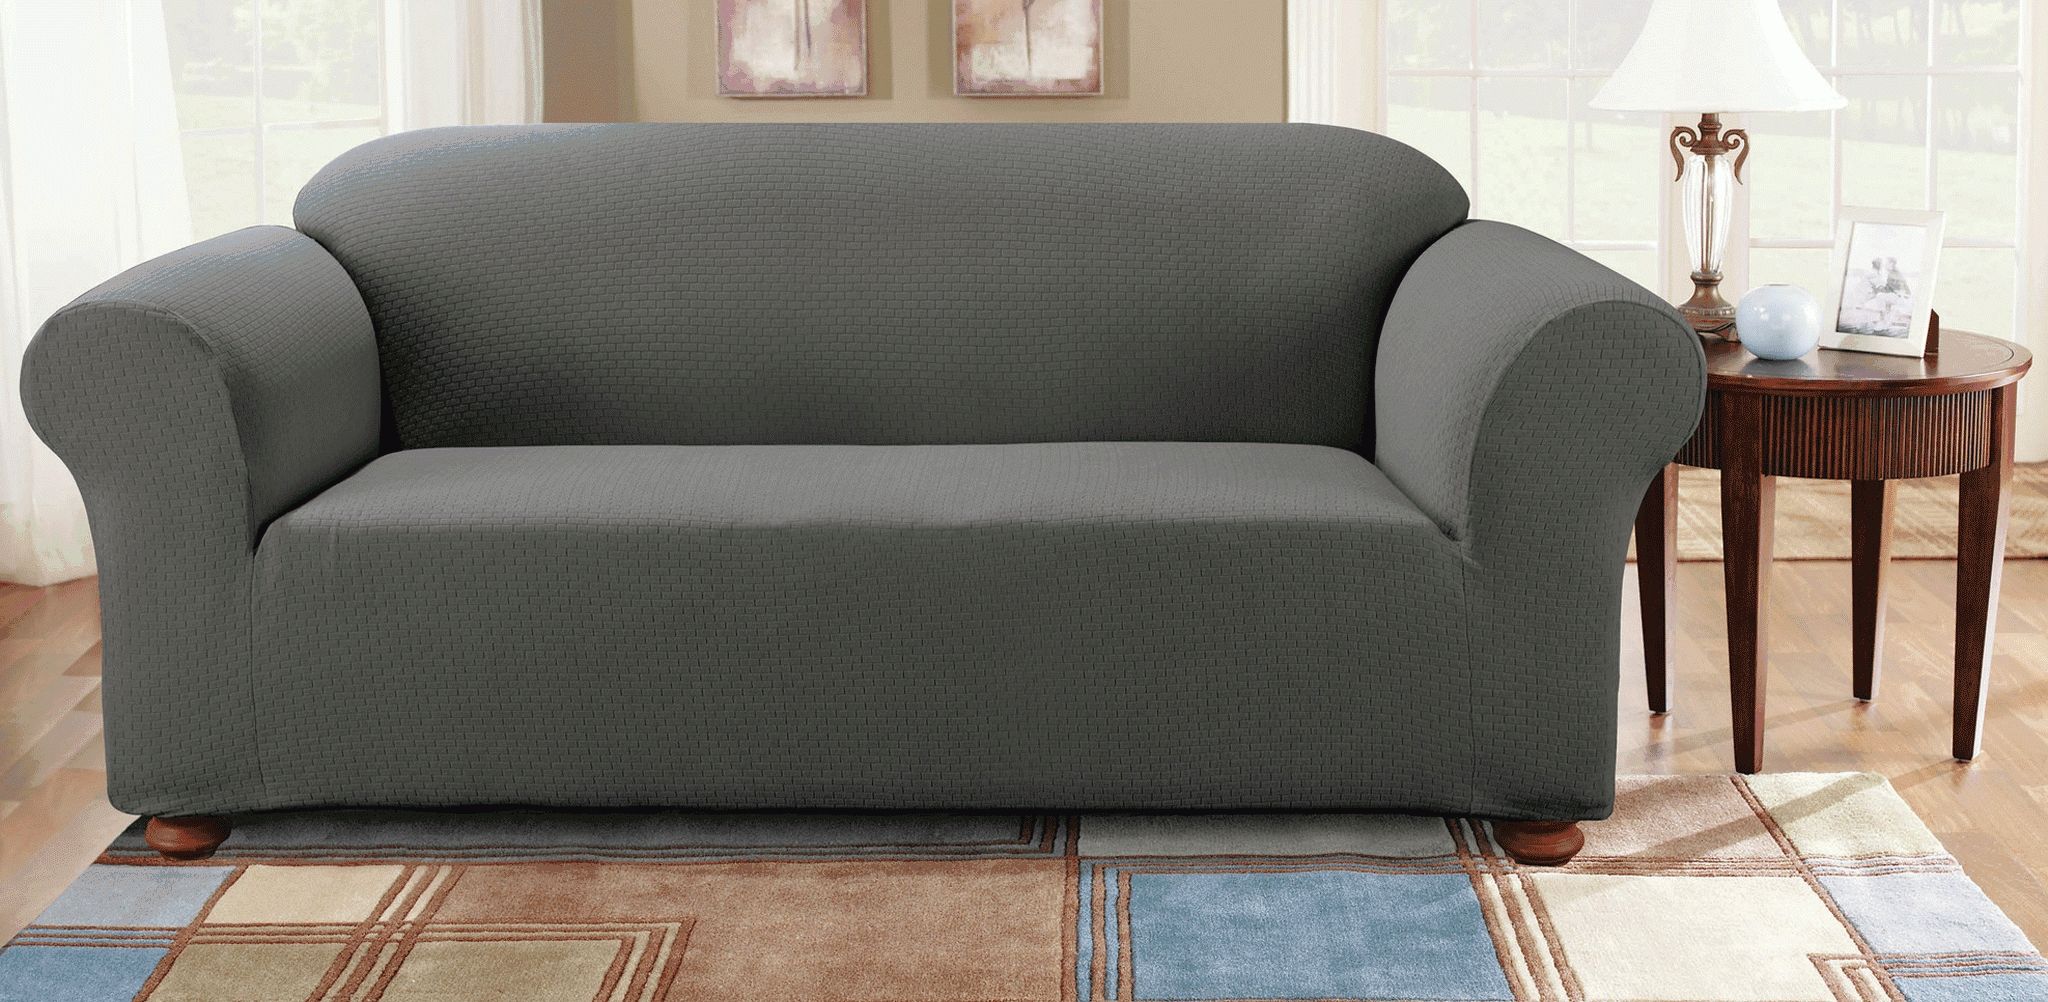 Furniture: Couch Covers At Walmart To Make Your Furniture Stylish Intended For Covers For Sofas (View 5 of 30)